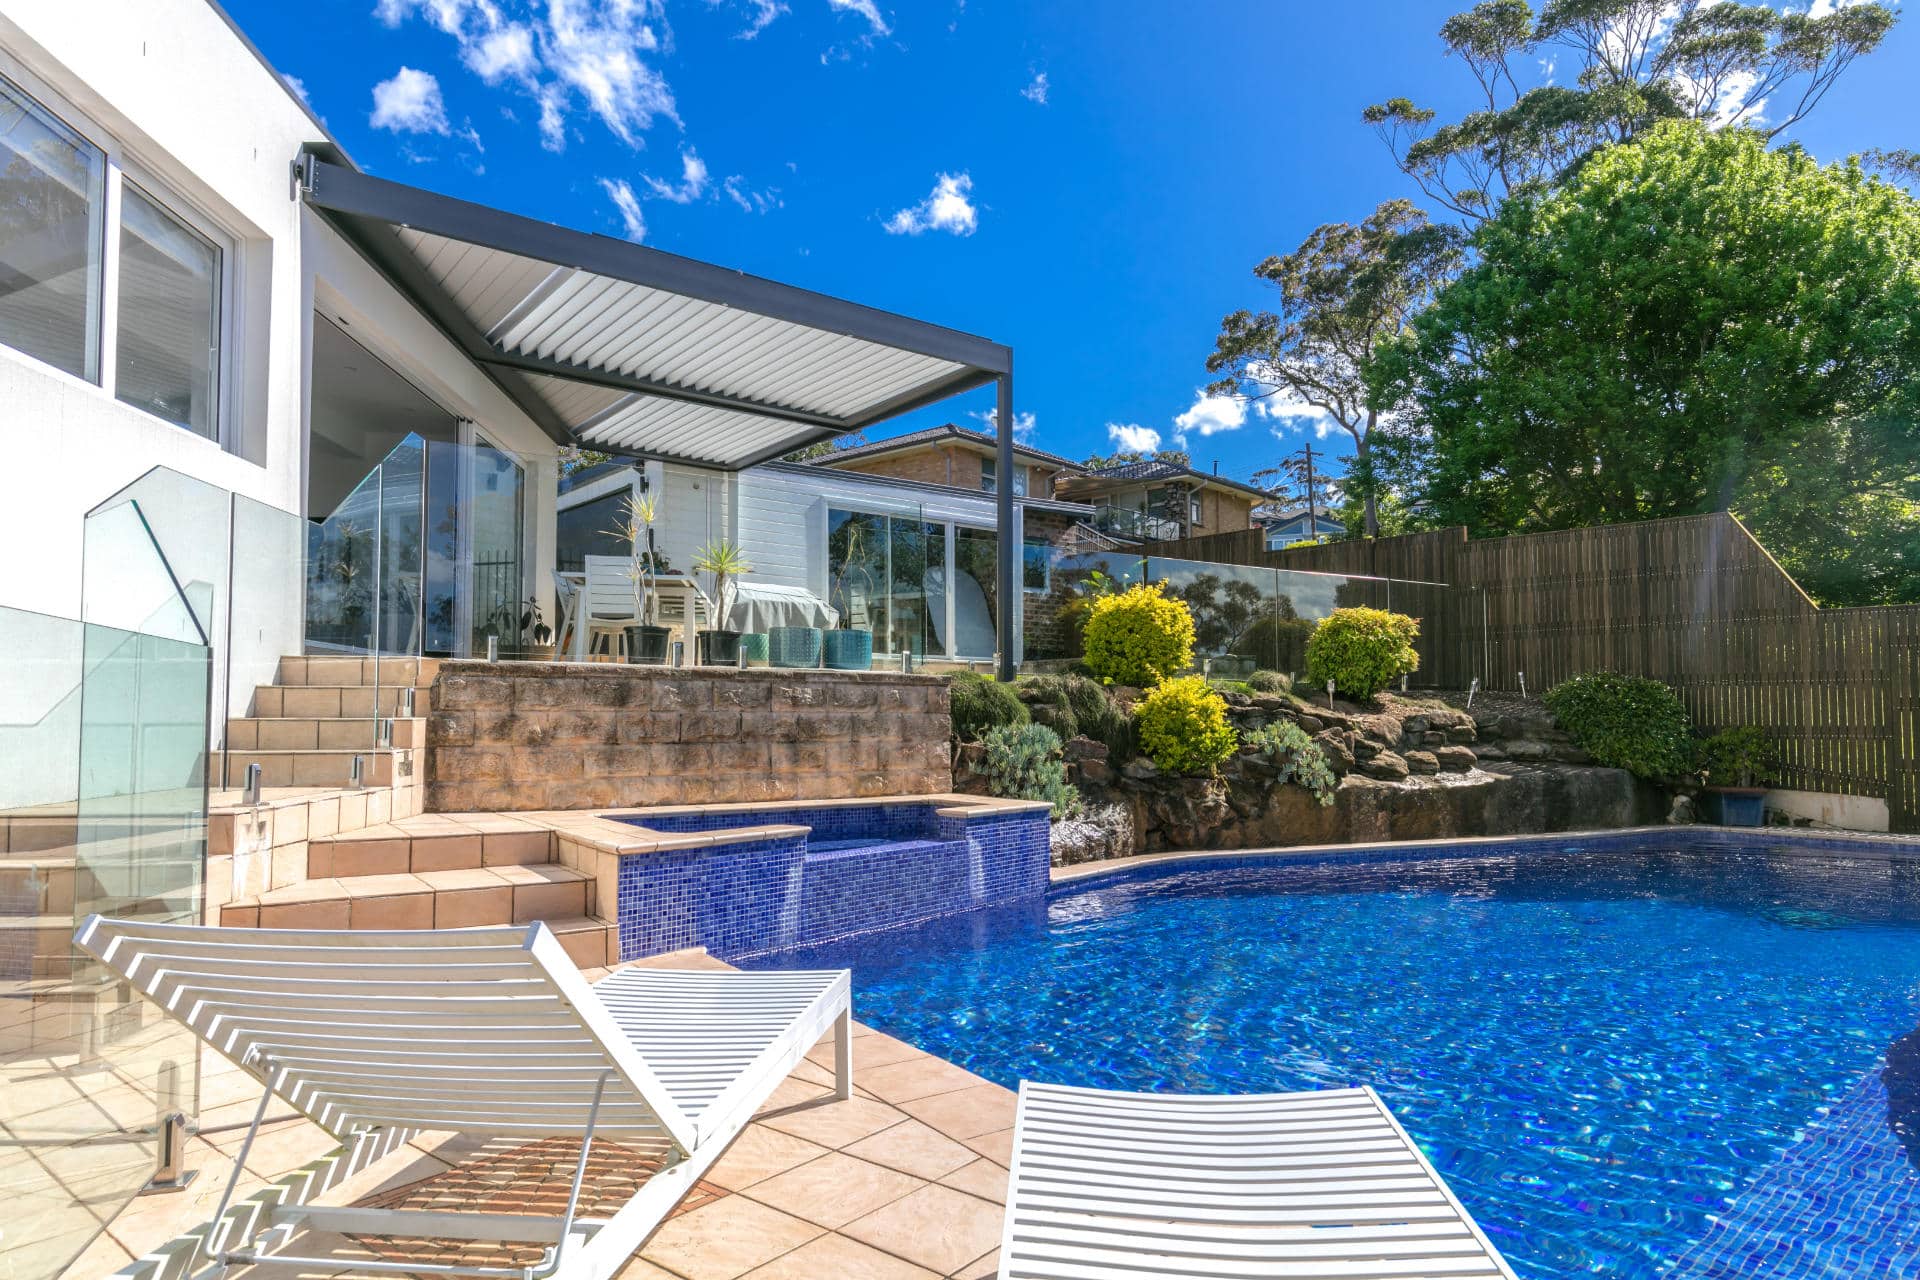 Unique shaped pergola at stunning Frenchs Forest home.